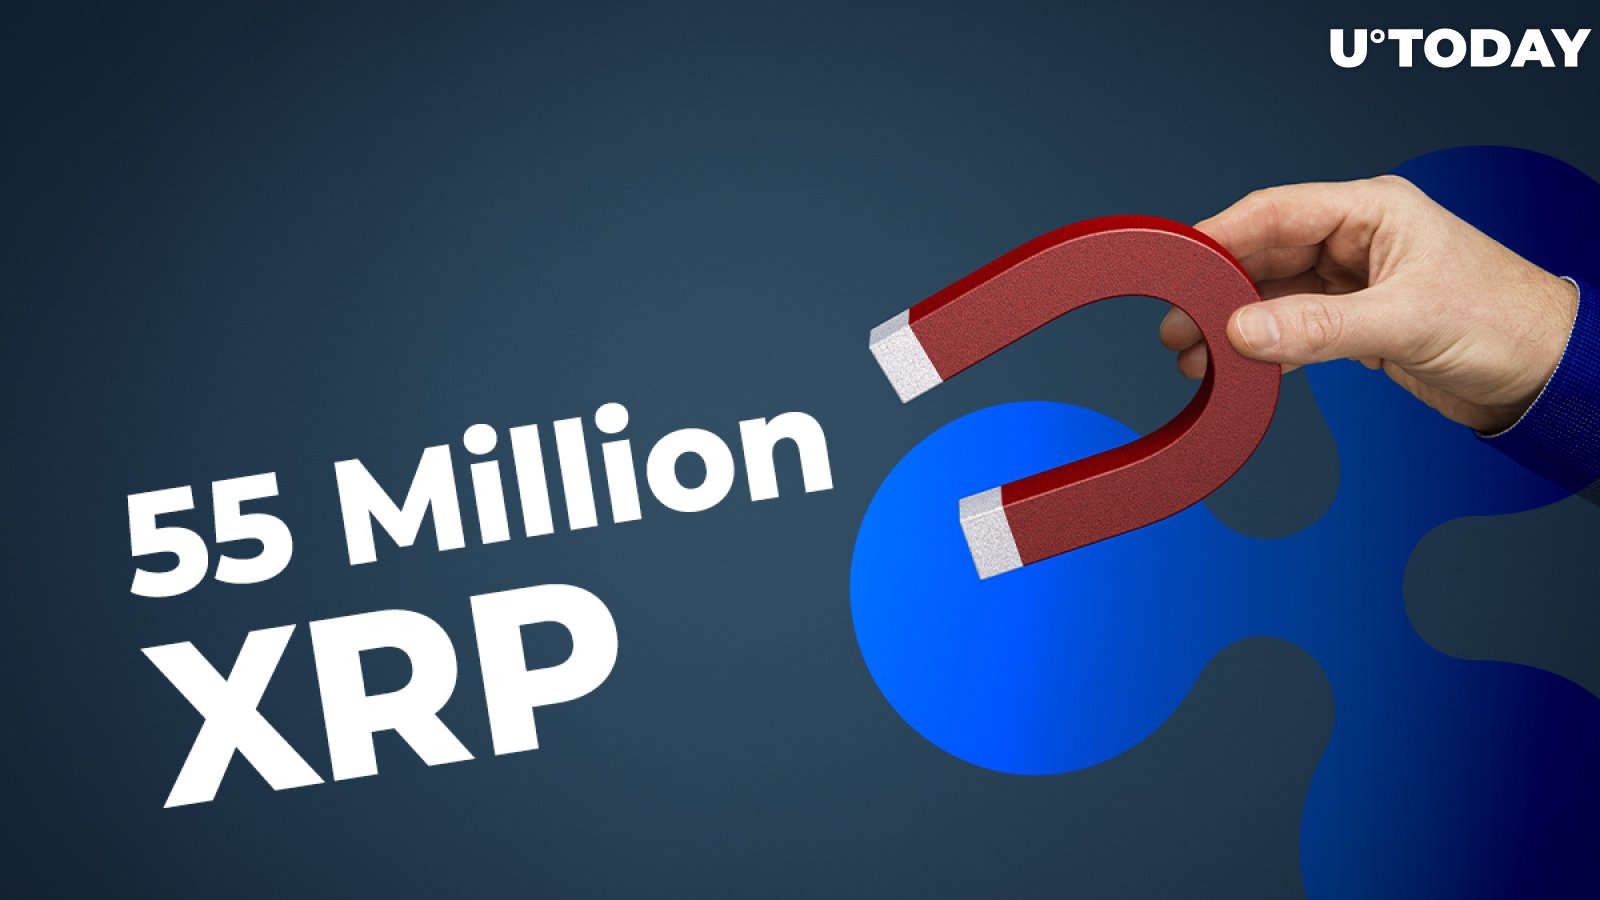 Ripple and Top Exchanges Move 55 Million XRP, While Coin Holds at $0.32